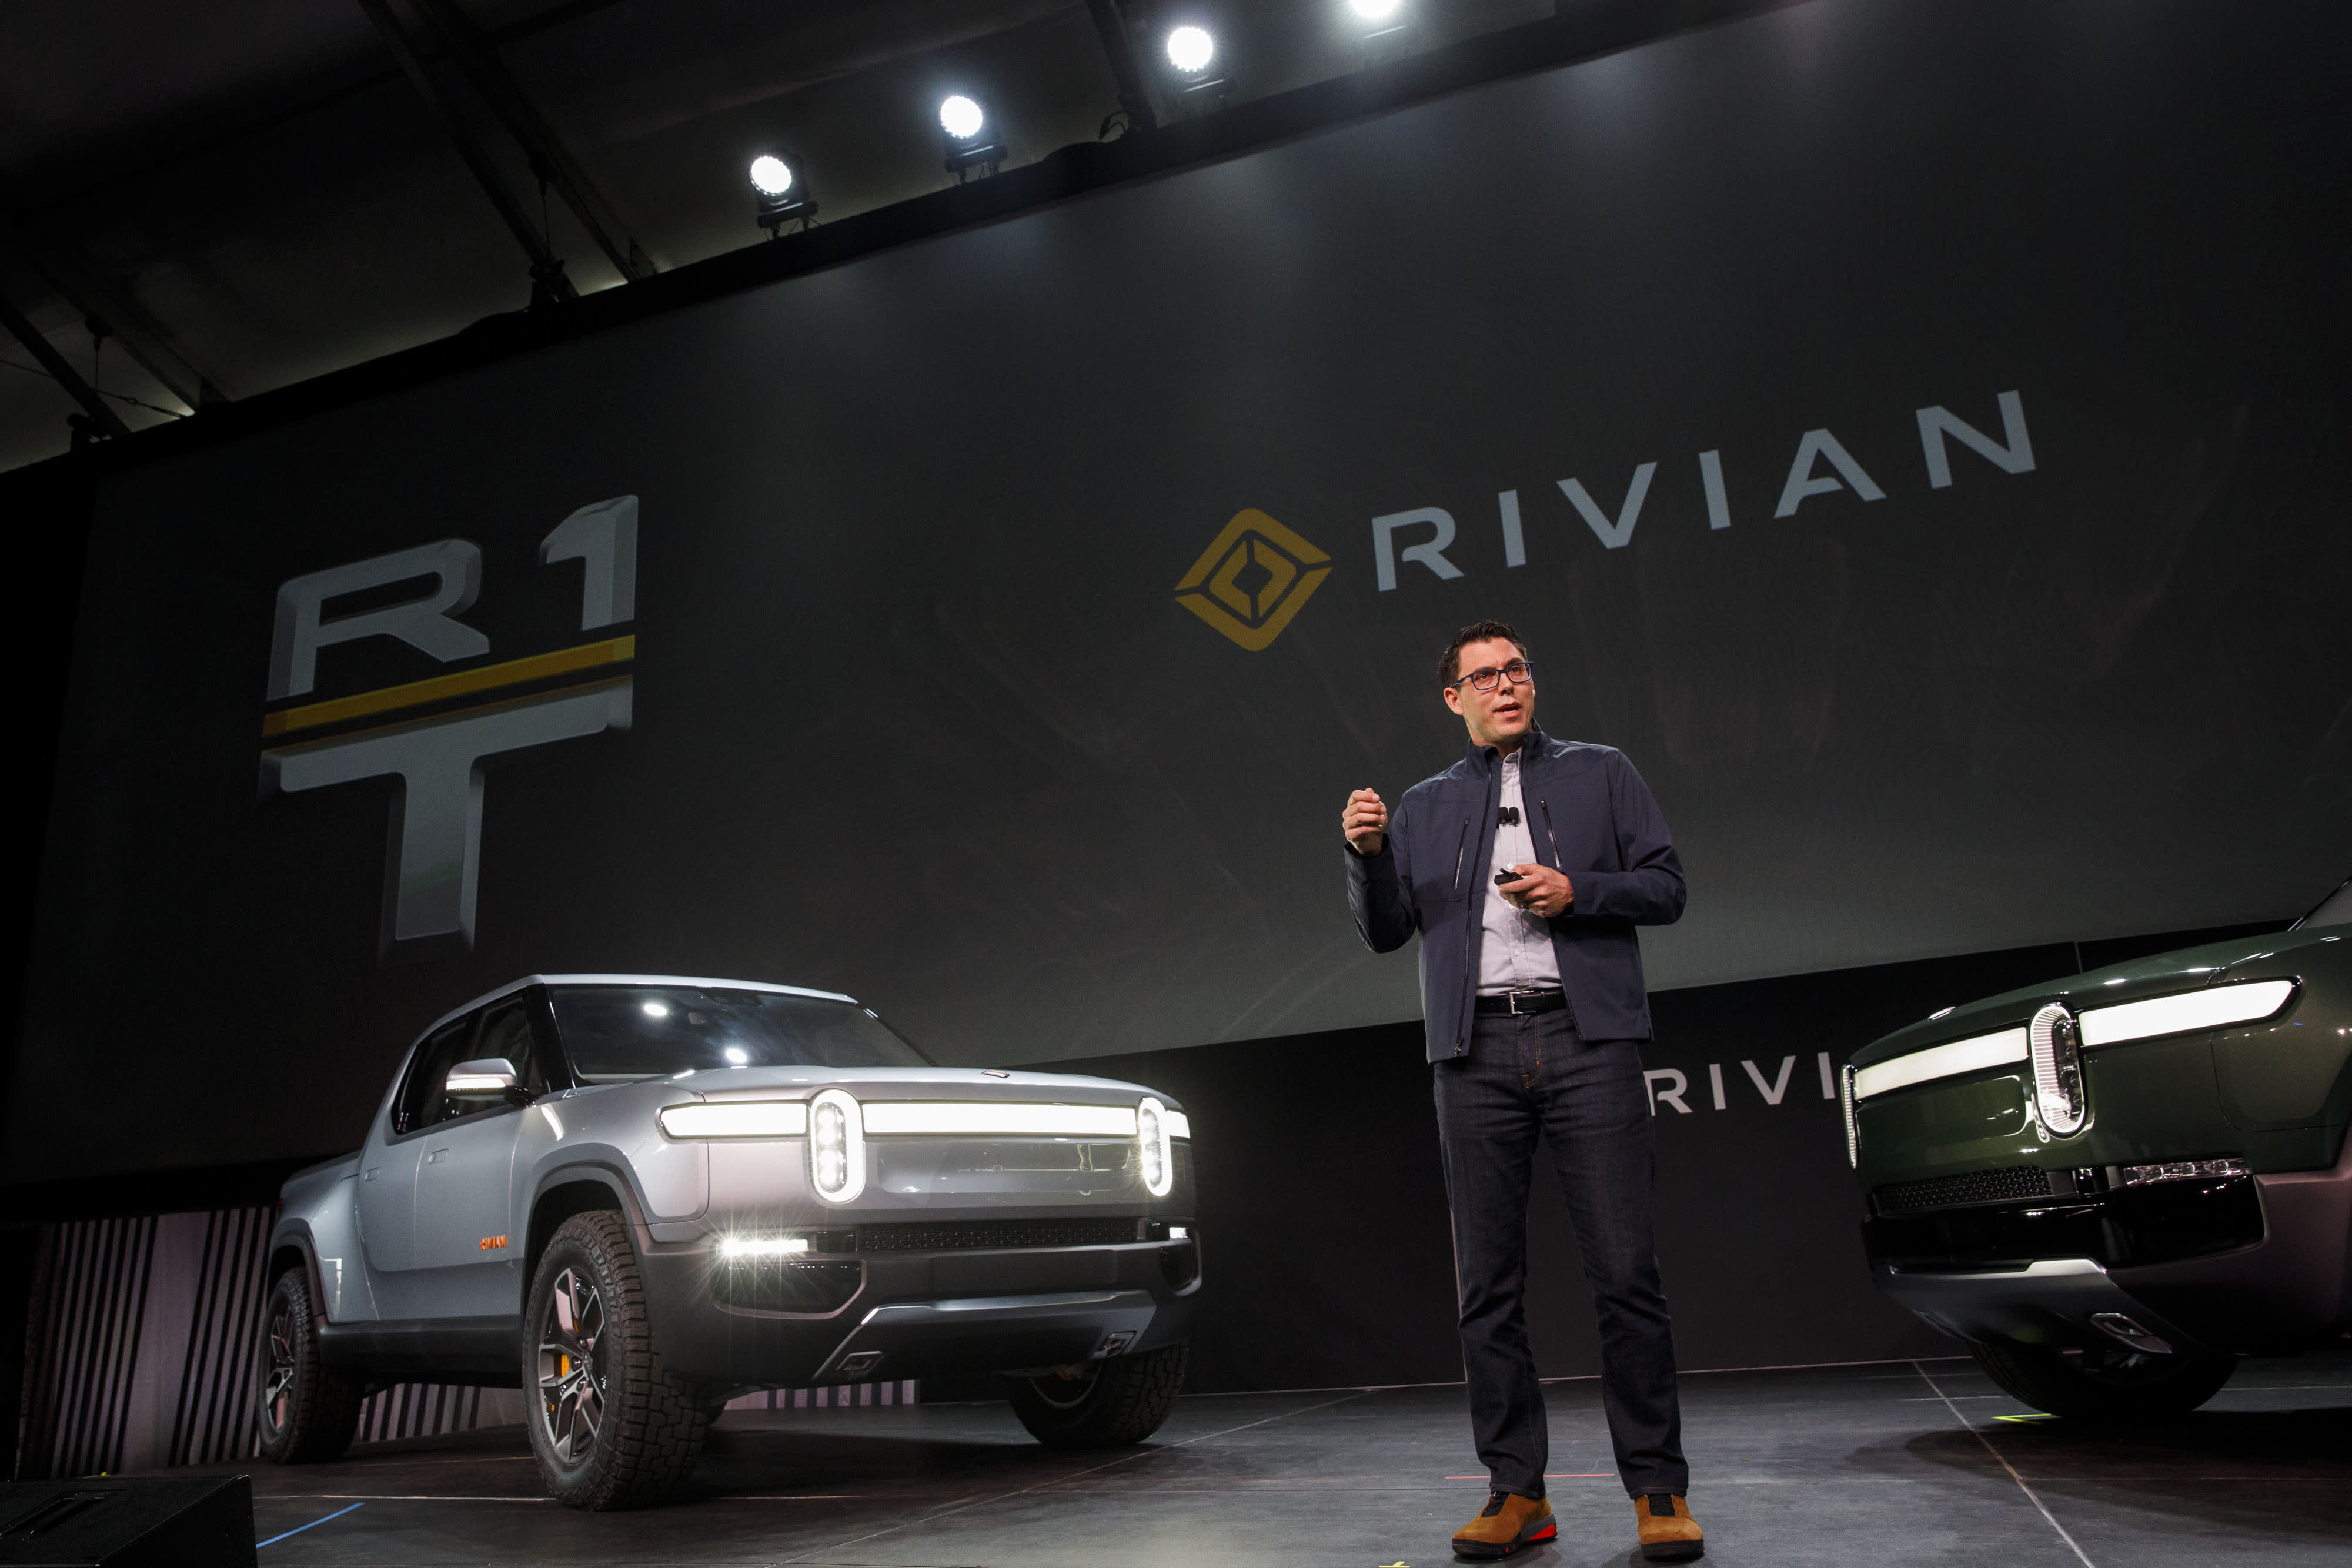 Rivian raises .5 billion in new funding round led by Amazon, Ford